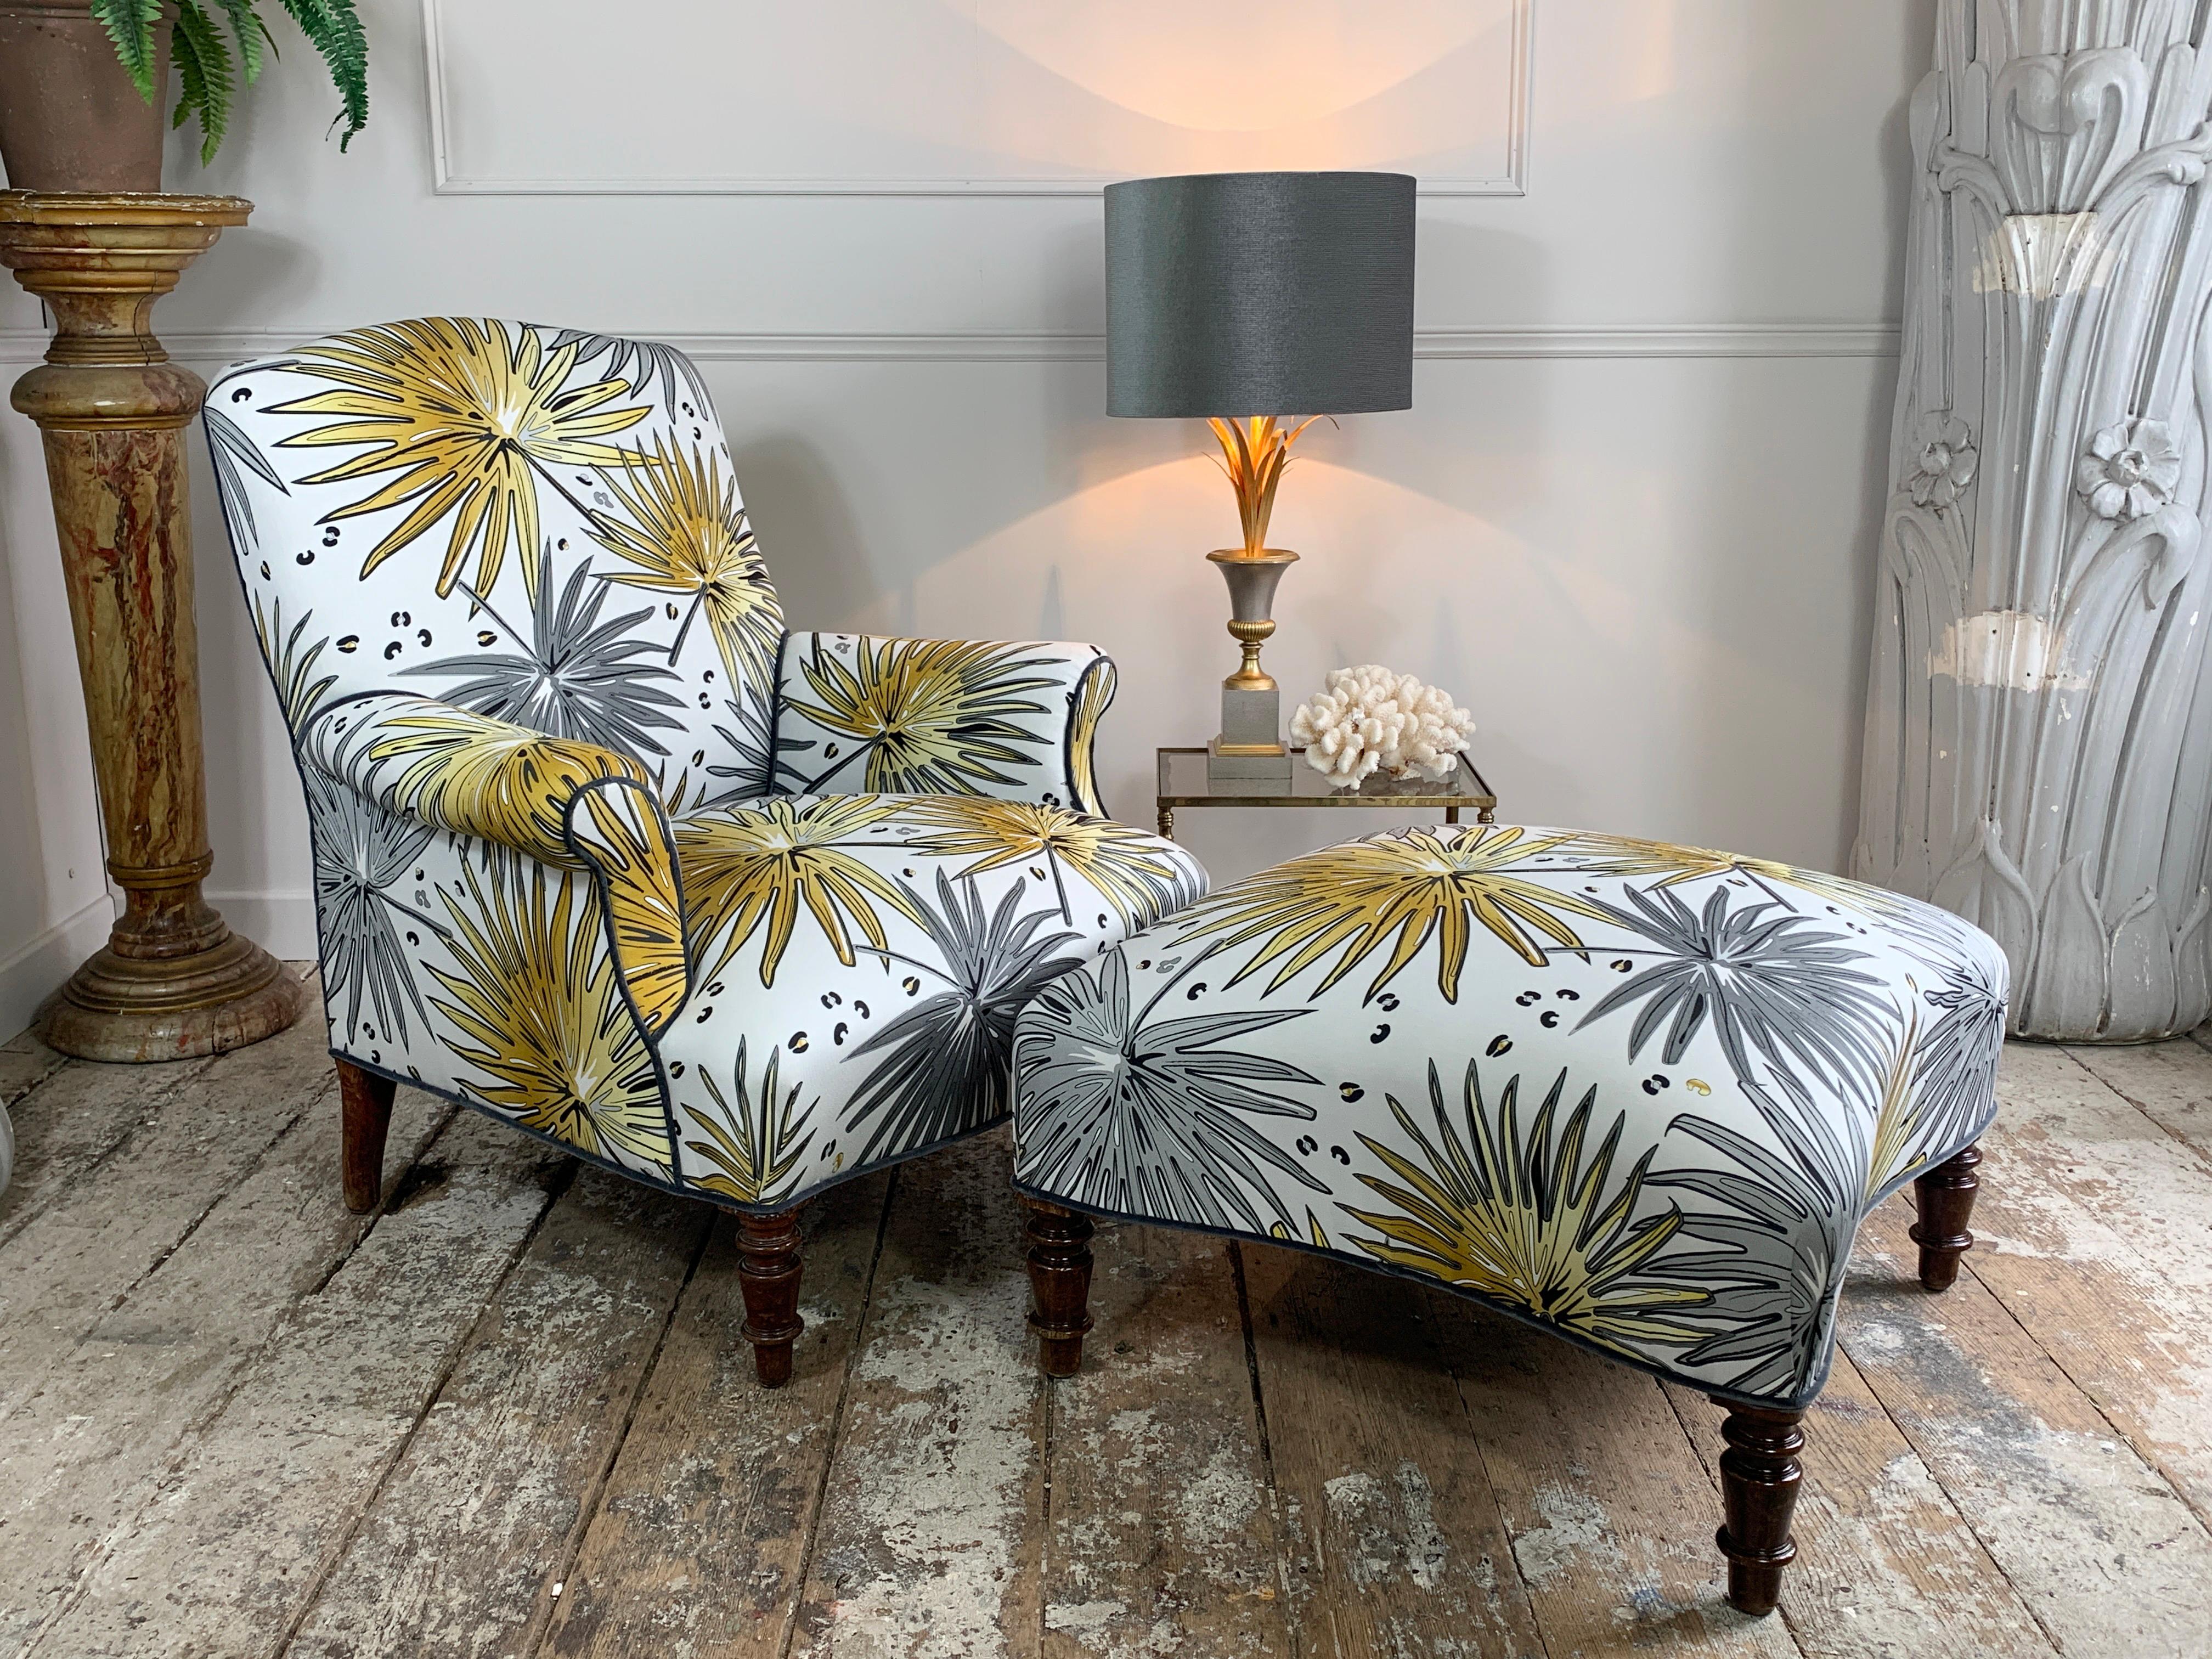 Napoleon III 19th C French Armchair and Footstool in 'Fan Palm’ Fabric For Sale